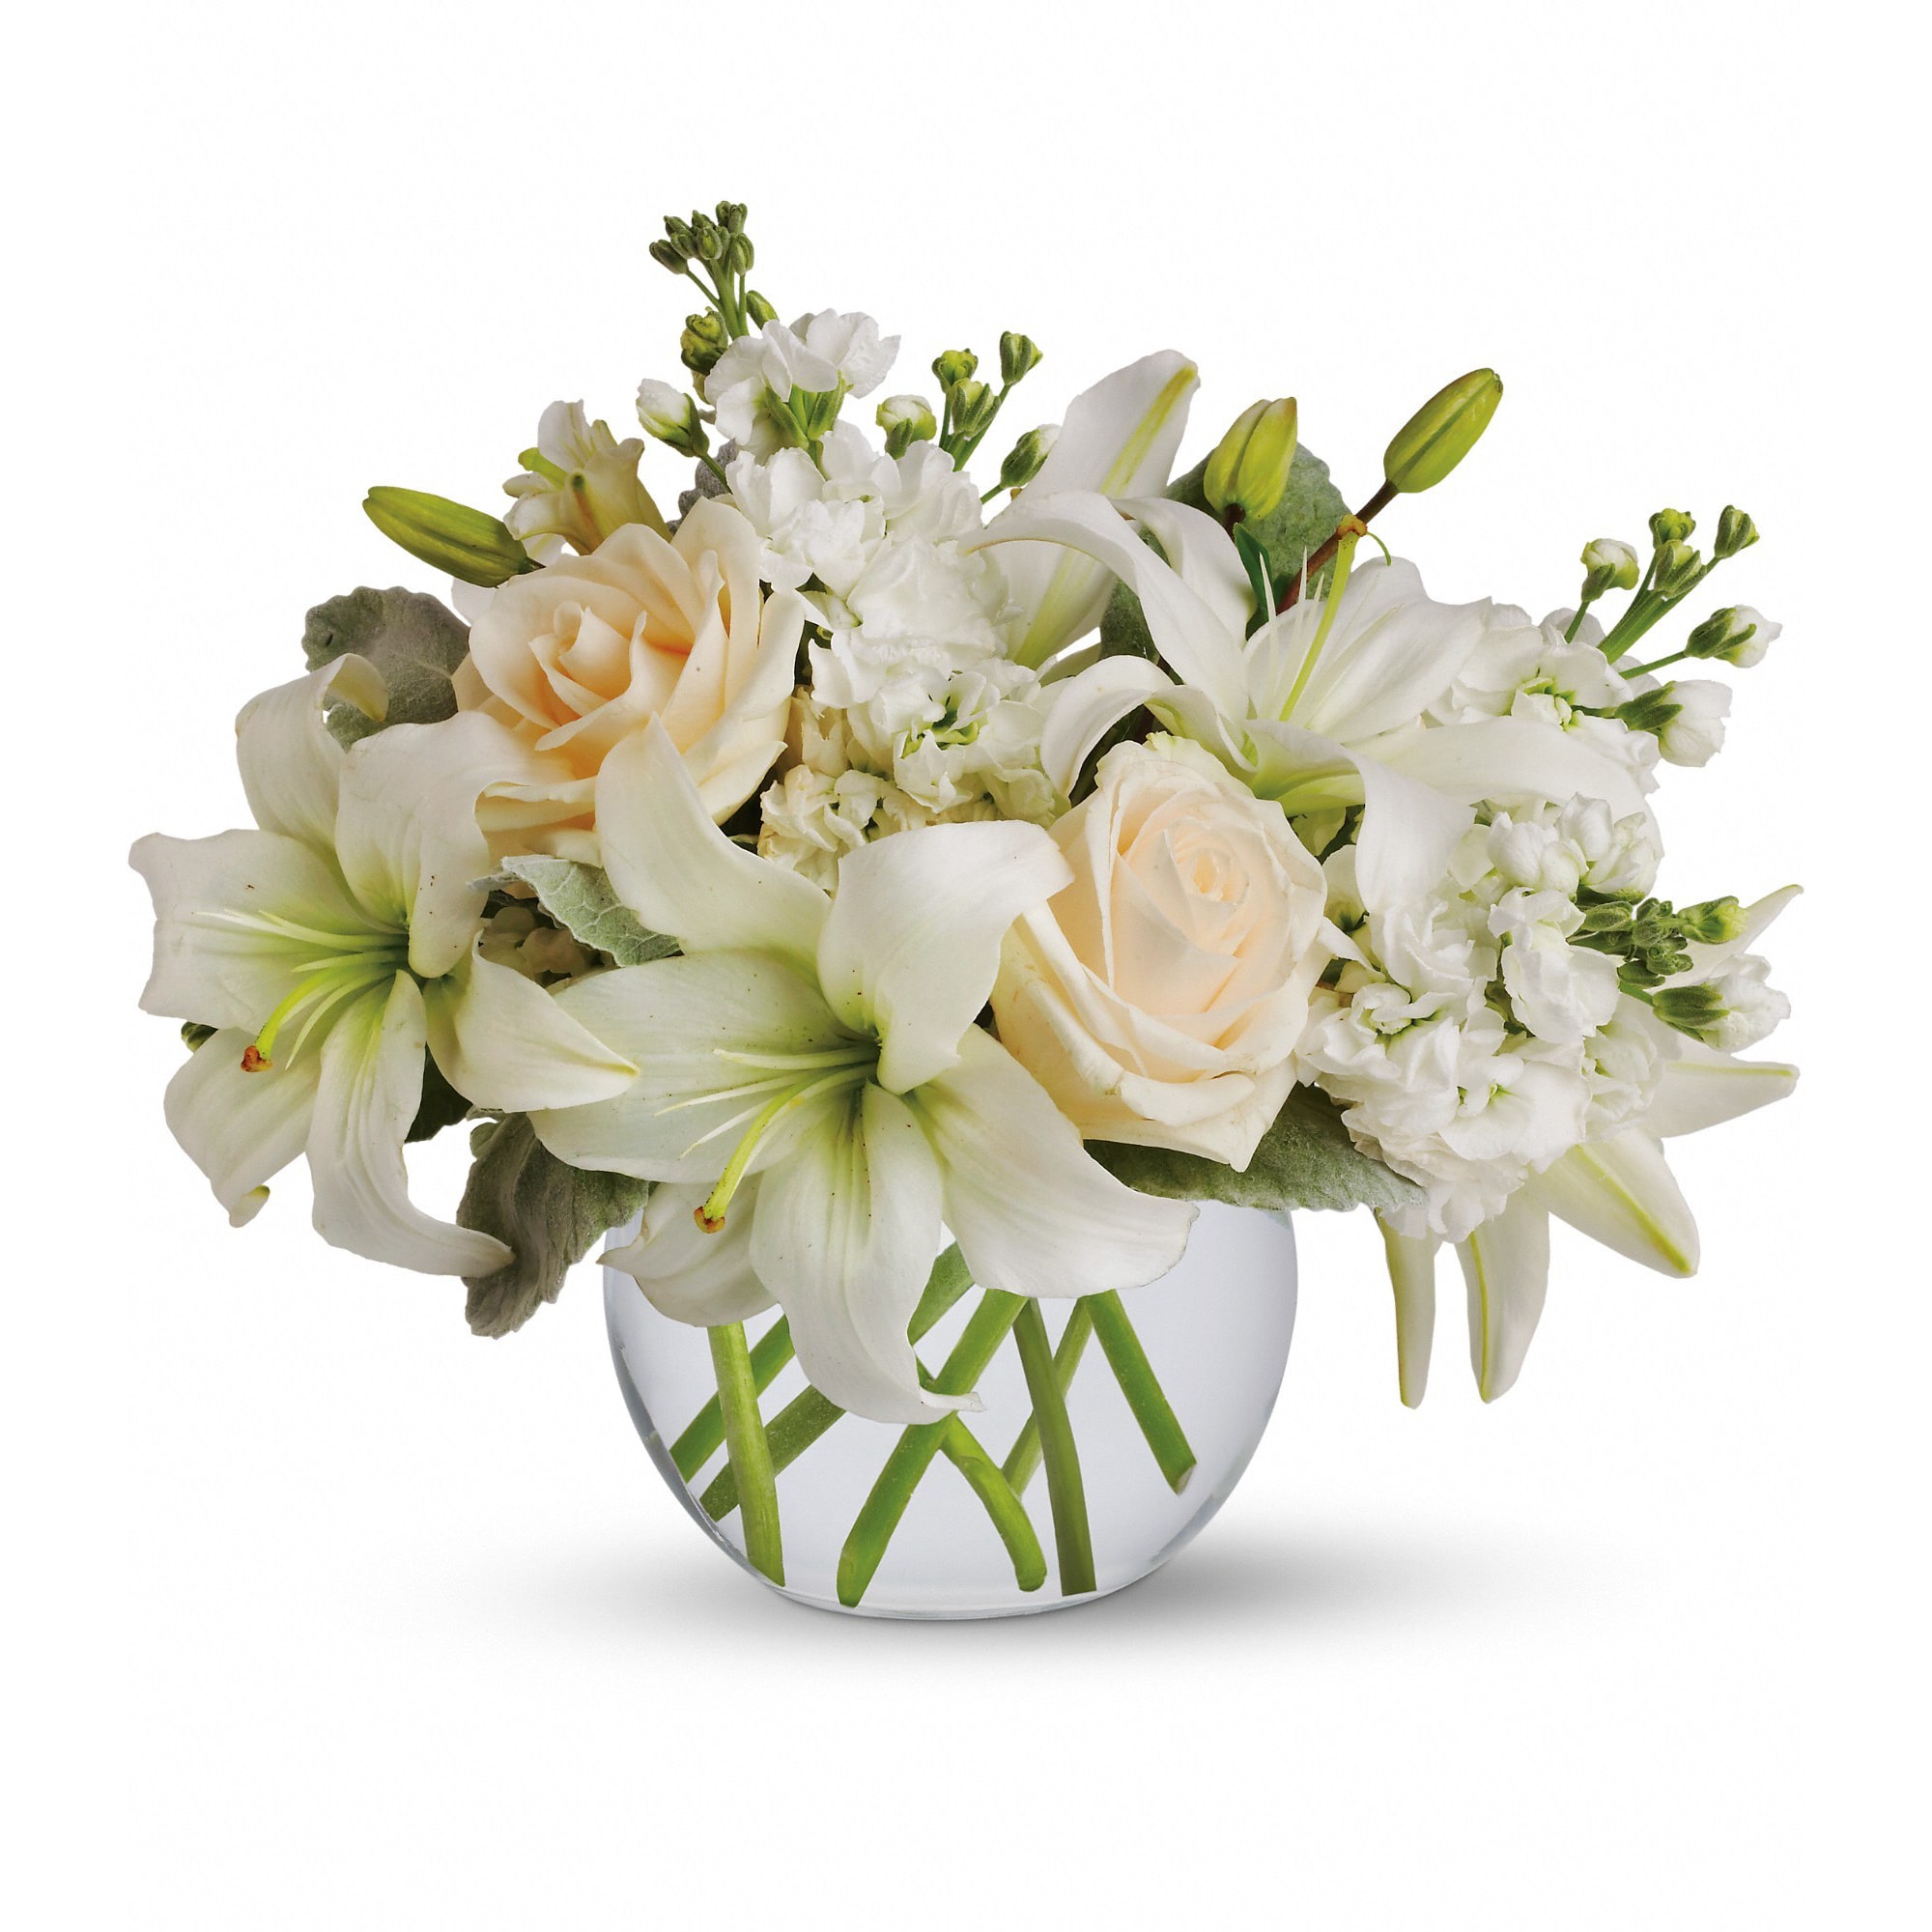 Isle of White - Like a vacation for the senses, this lovely bouquet delivers an oasis of beauty and elegance. Soothing, serene and very special.